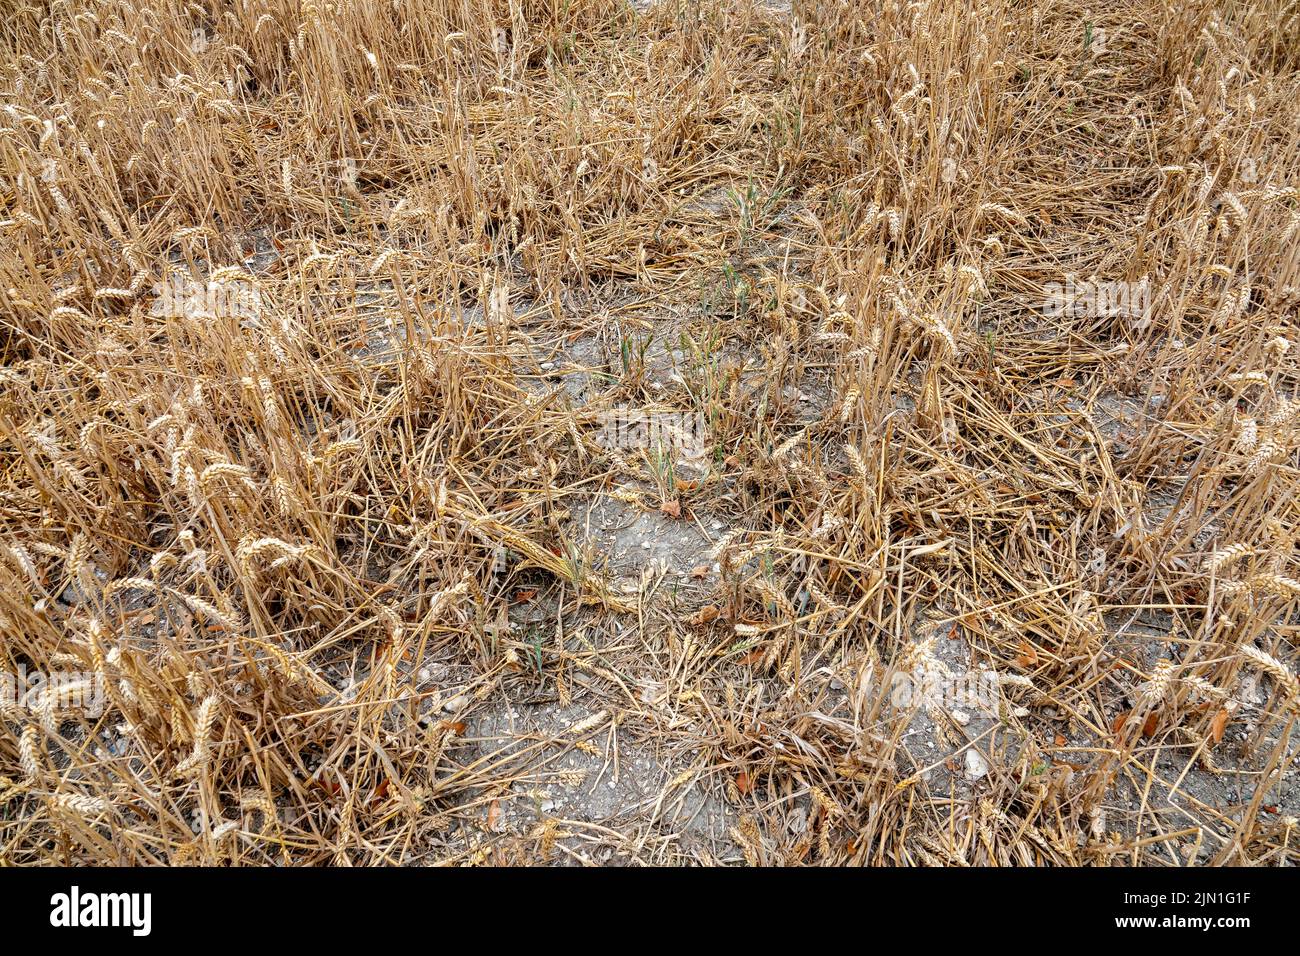 A small area of a failing wheat crop due to drought Stock Photo